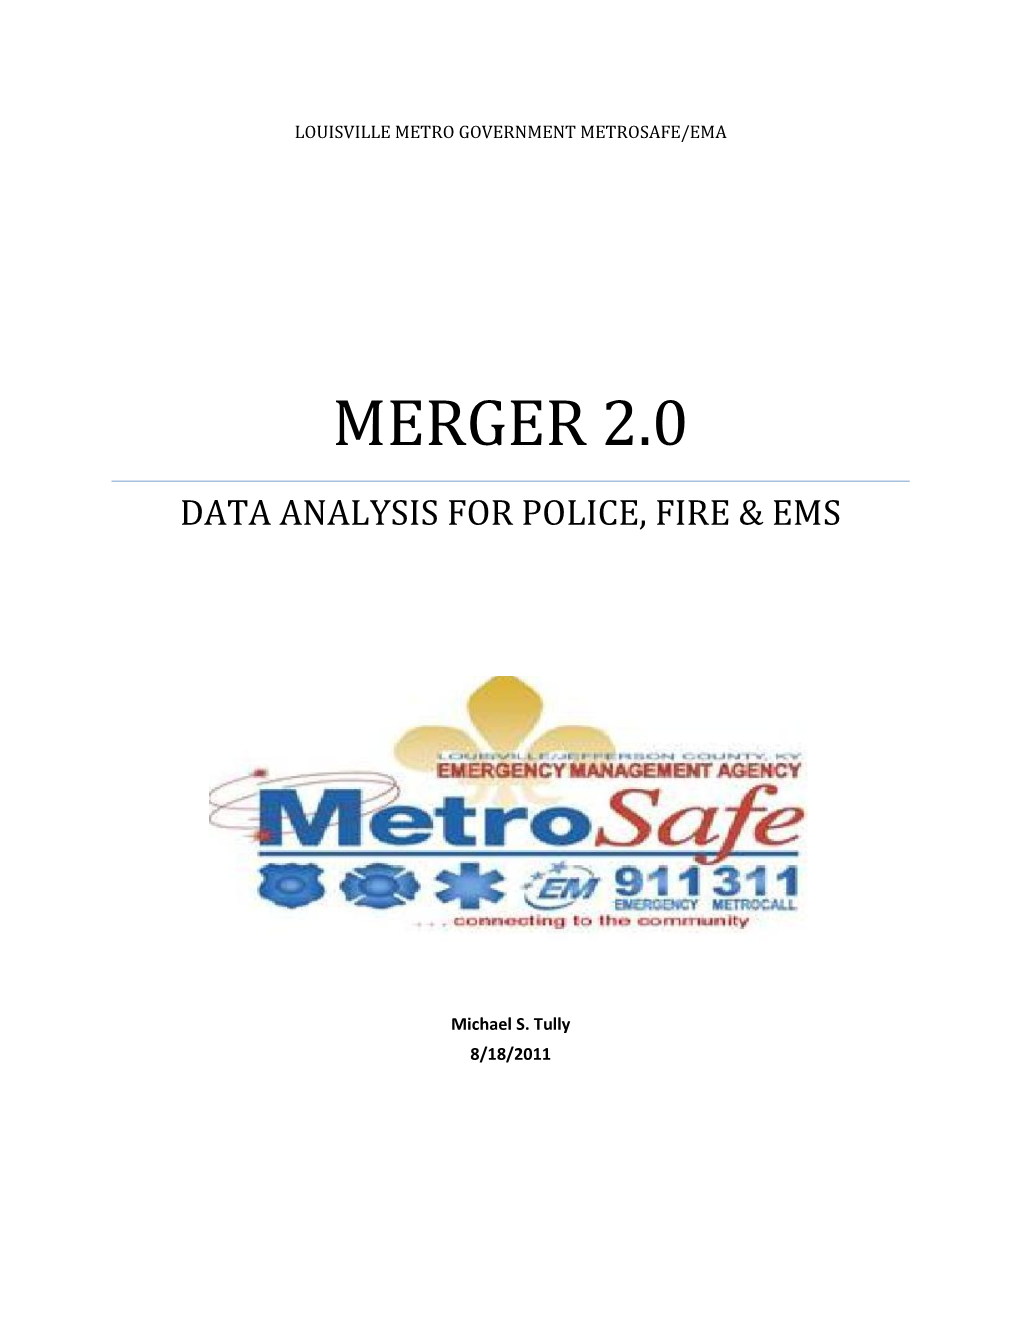 Merger 2.0 Data Analysis for Police, Fire & Ems